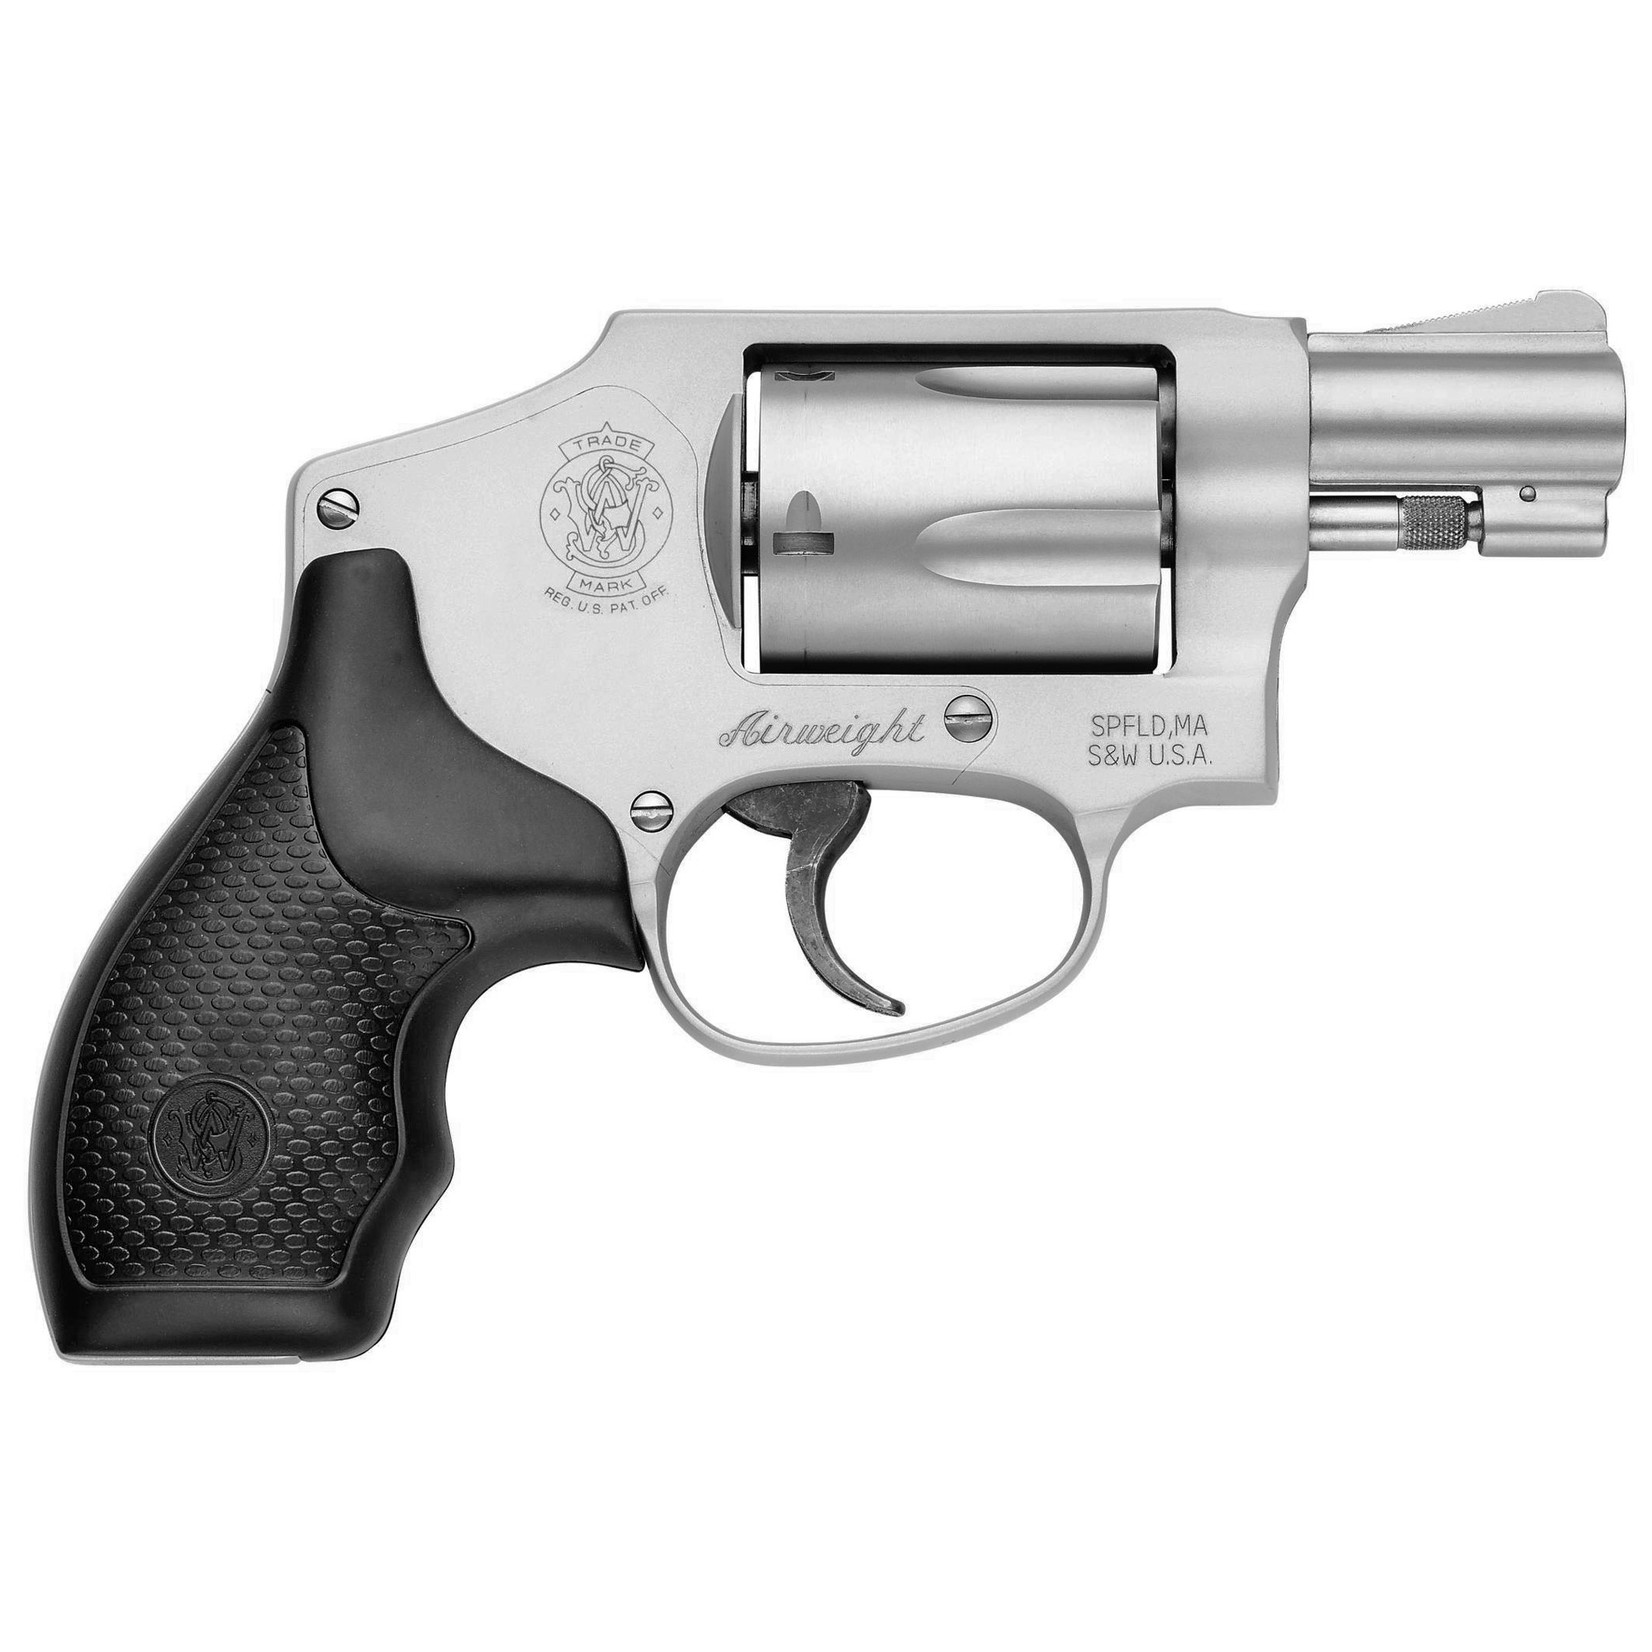 SMITH & WESSON SMITH & WESSON MODEL 642 38SPC 5RD 1.87" BBL DOUBLE ACTION ONLY REVOLVER